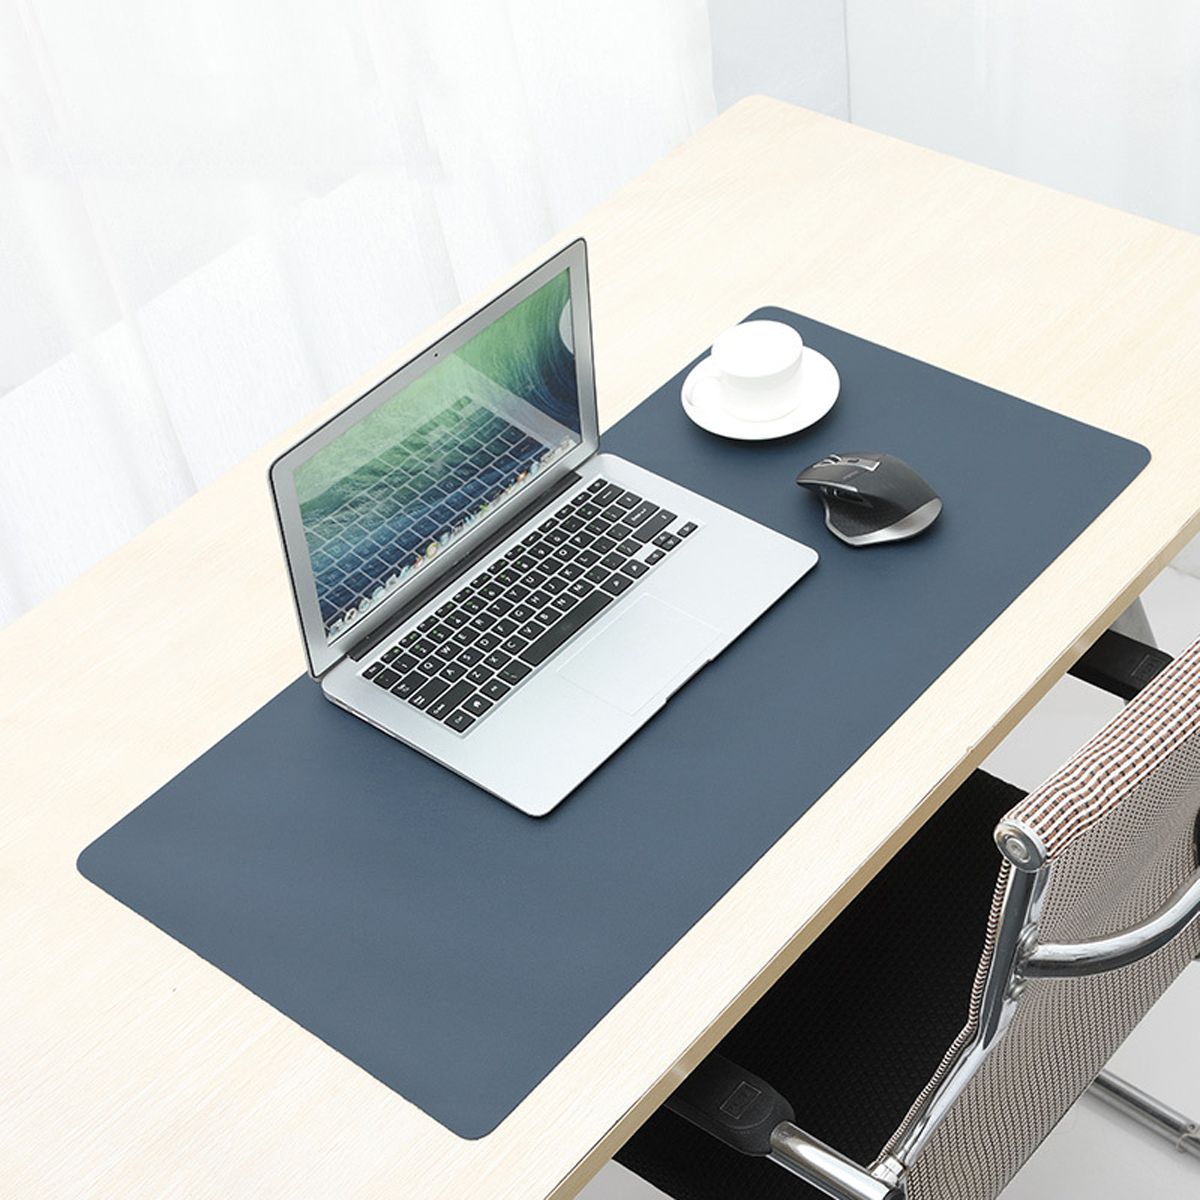 Waterproof-Mouse-Pad-Large-Office-Gaming-Desk-Mat-PU-Leather-Multifunctional-PVC-Pad-for-Laptop-Mous-1745560